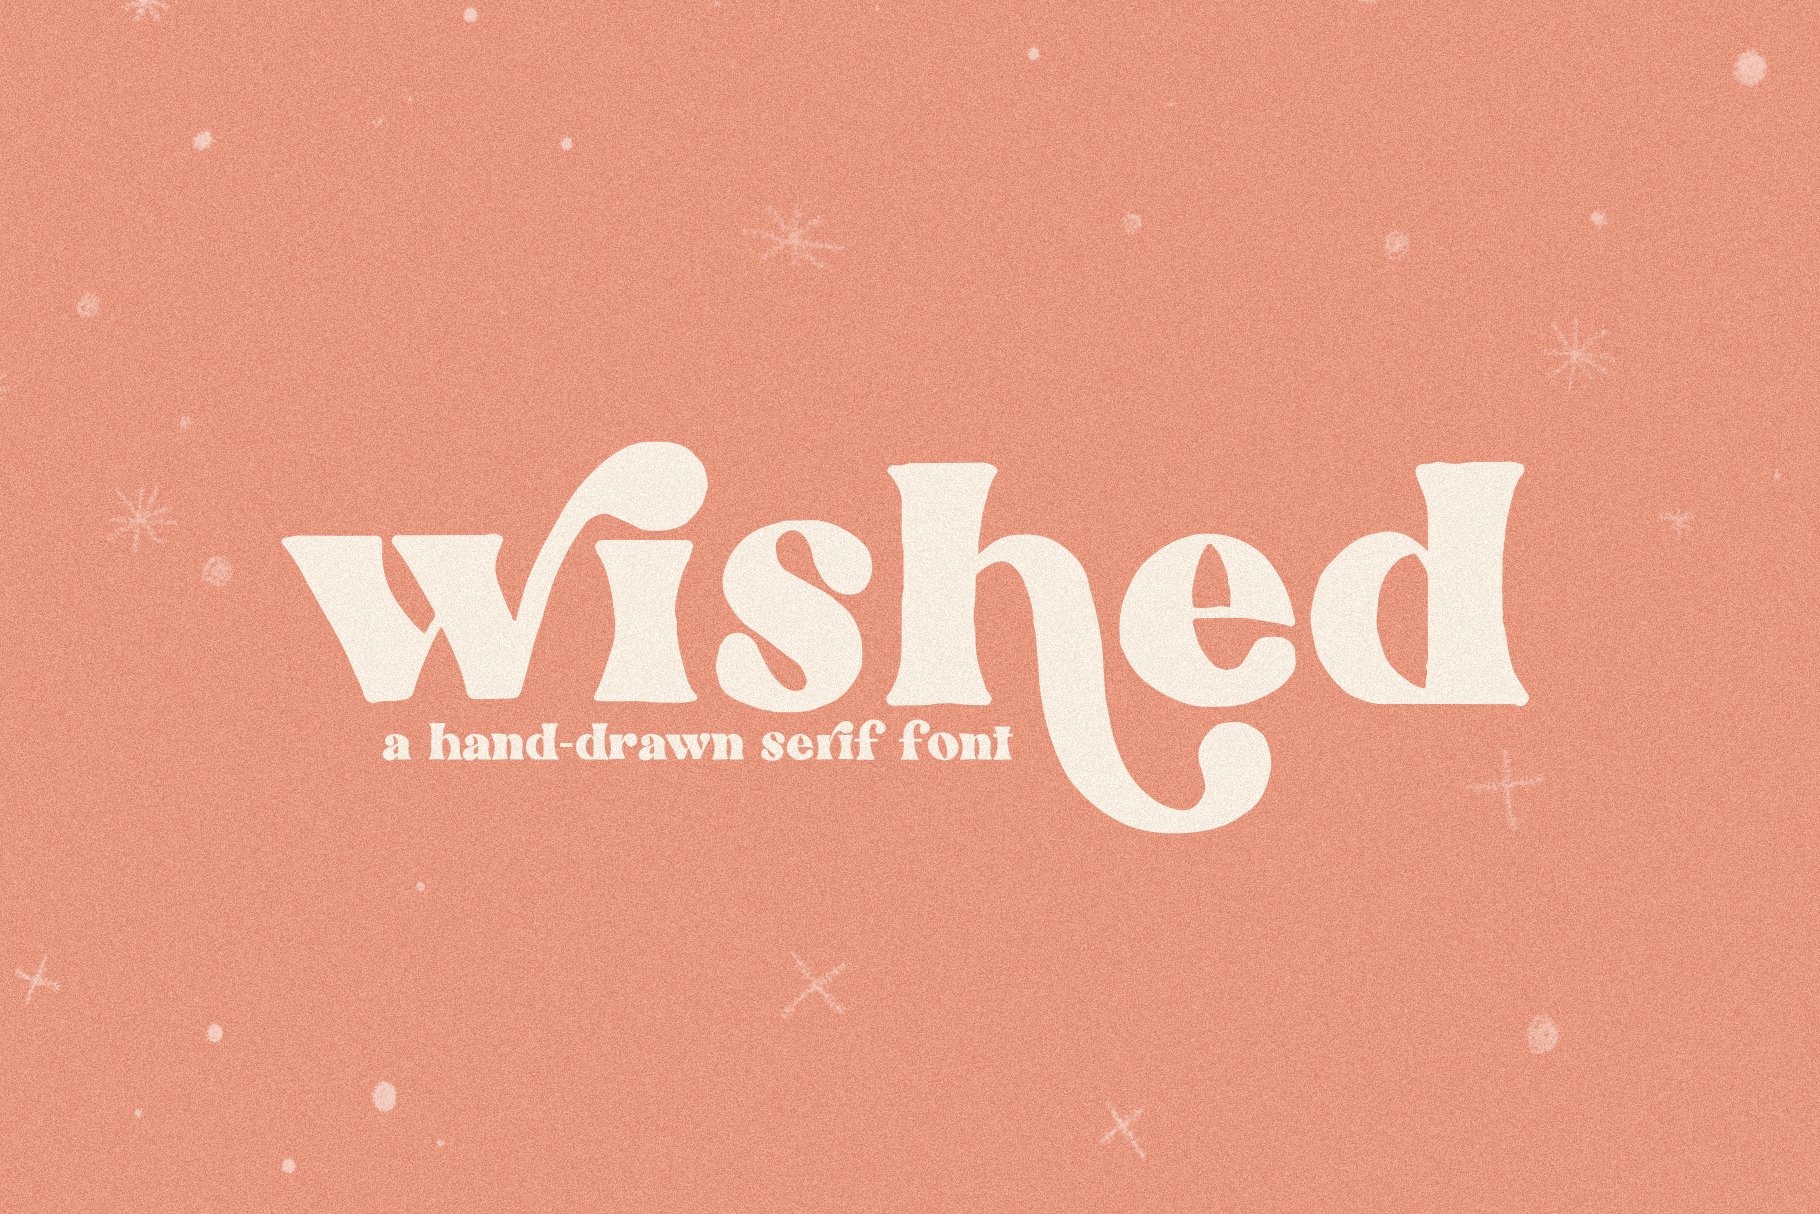 Wished | Hand-drawn Serif Font cover image.